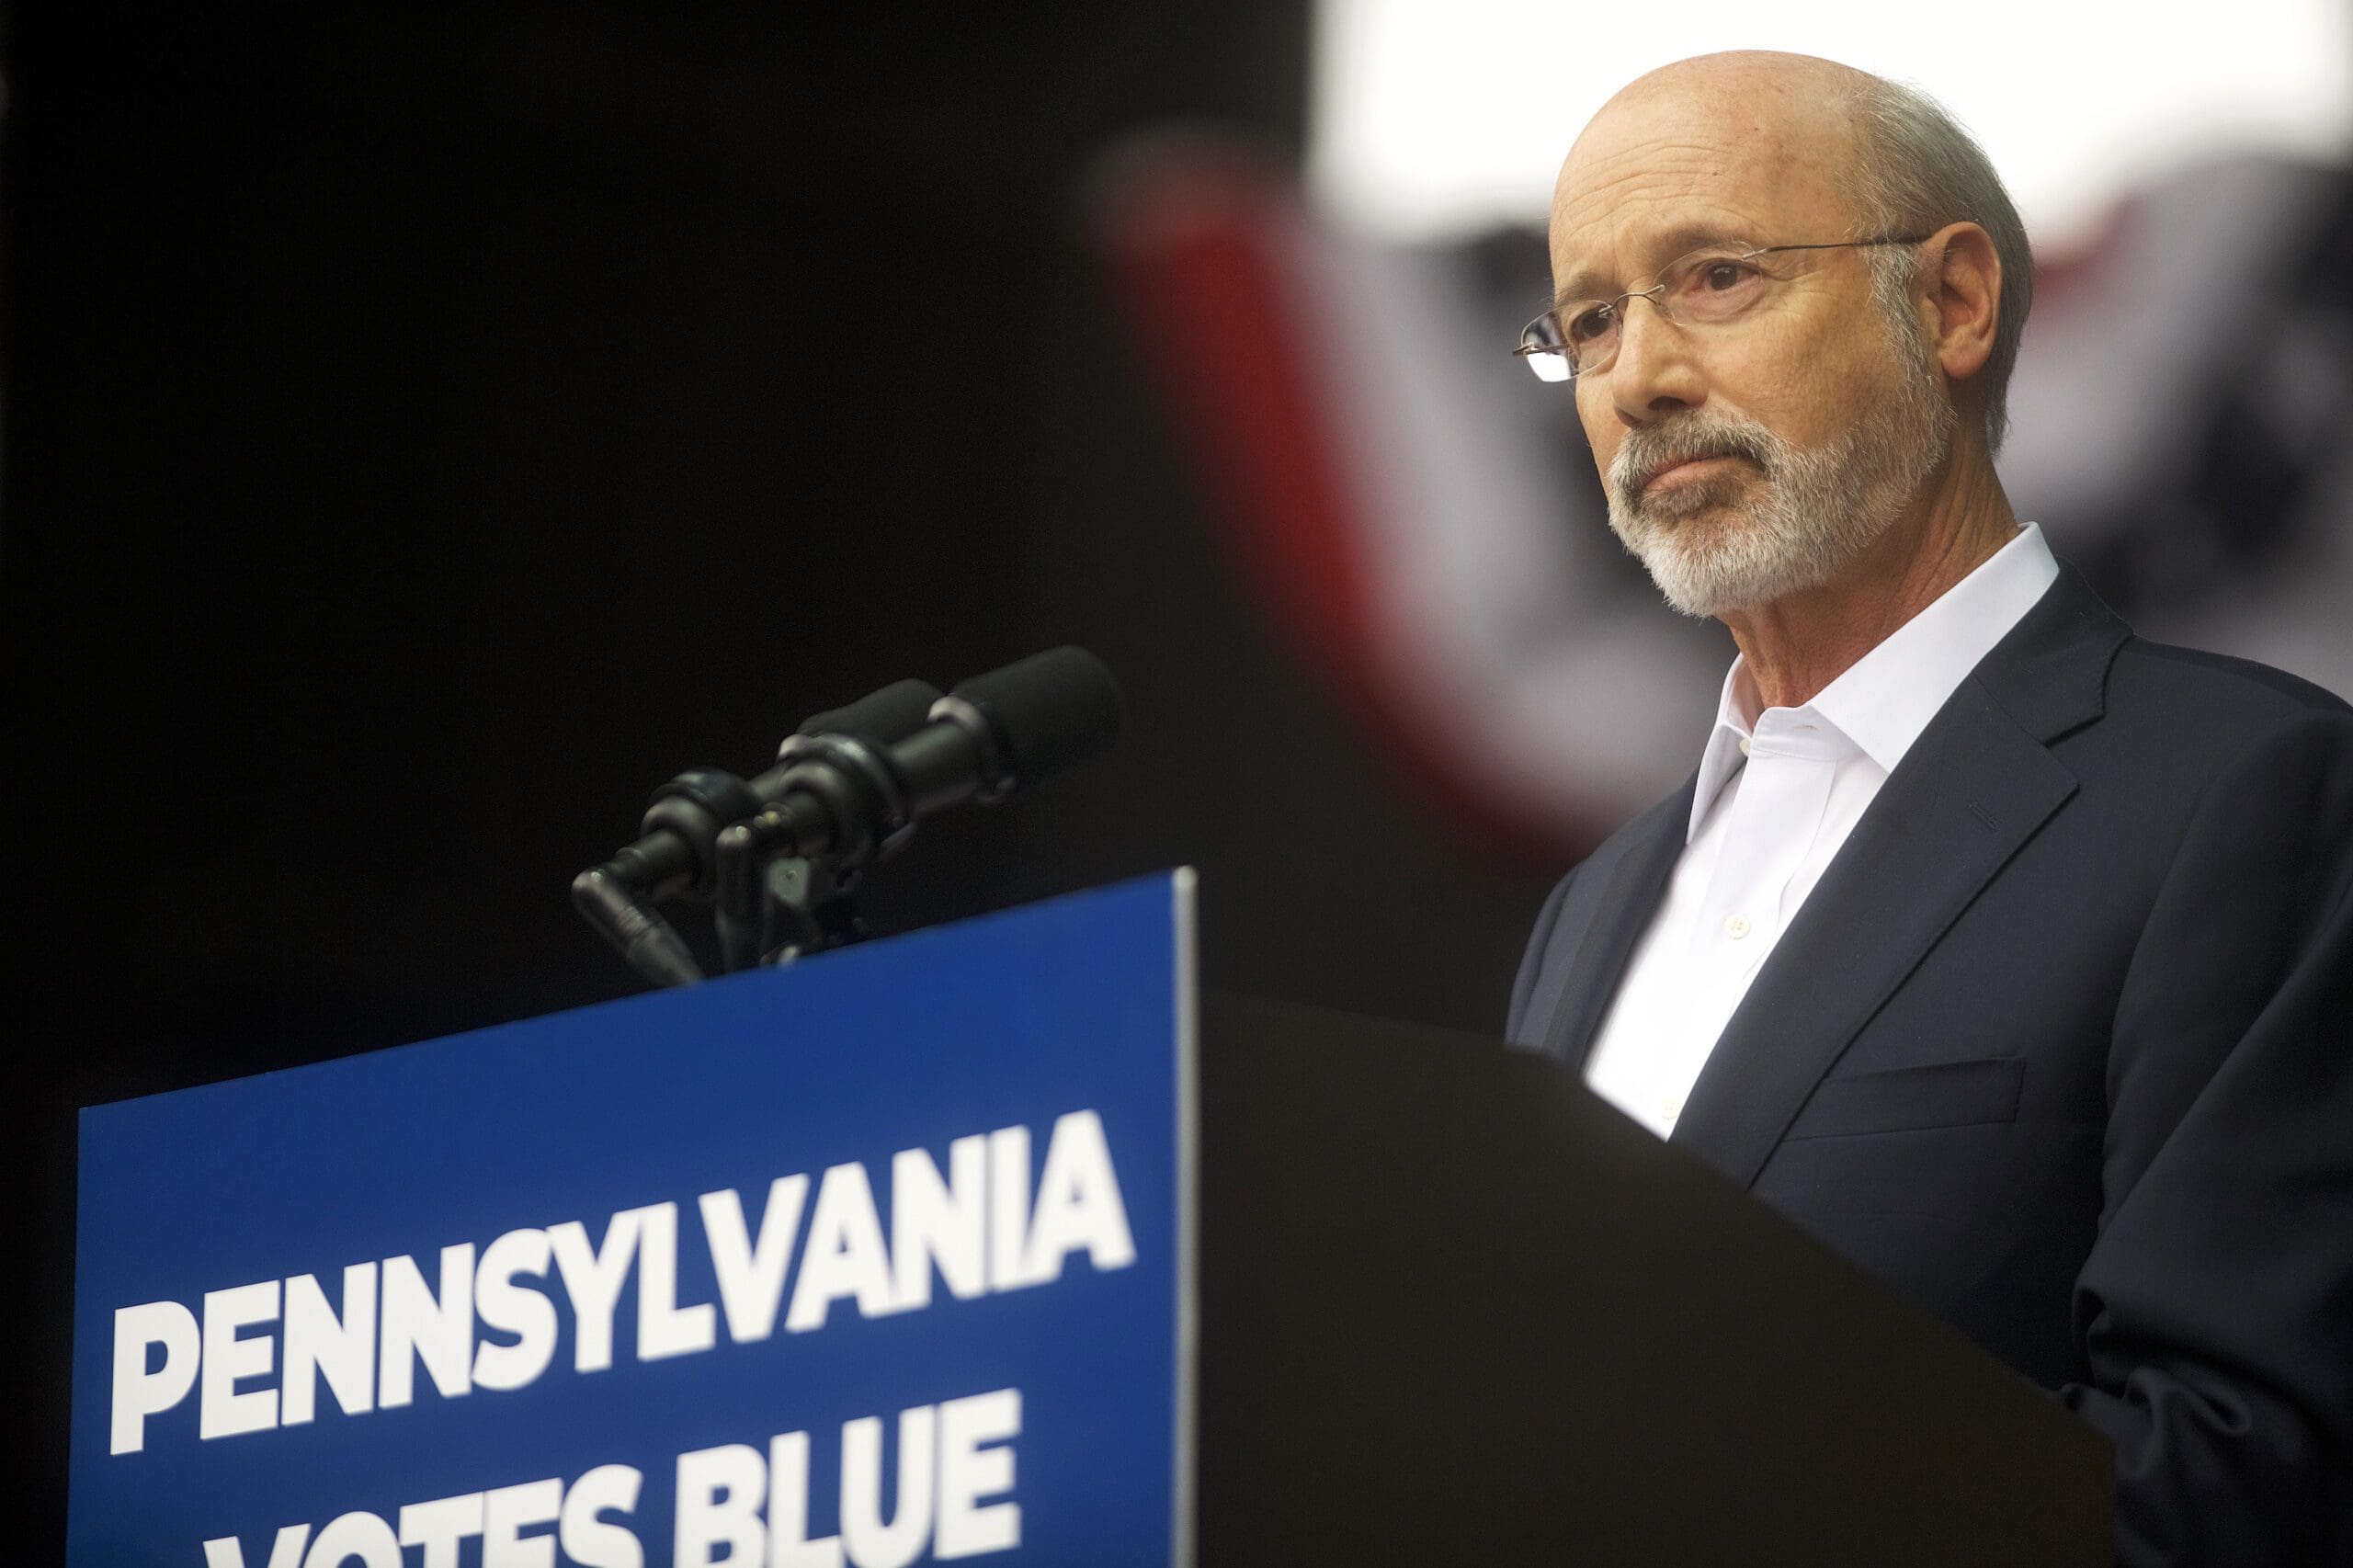 pennsylvania-taxpayers-spent-$16.7-million-on-trans-treatments-for-minors-since-2015:-report